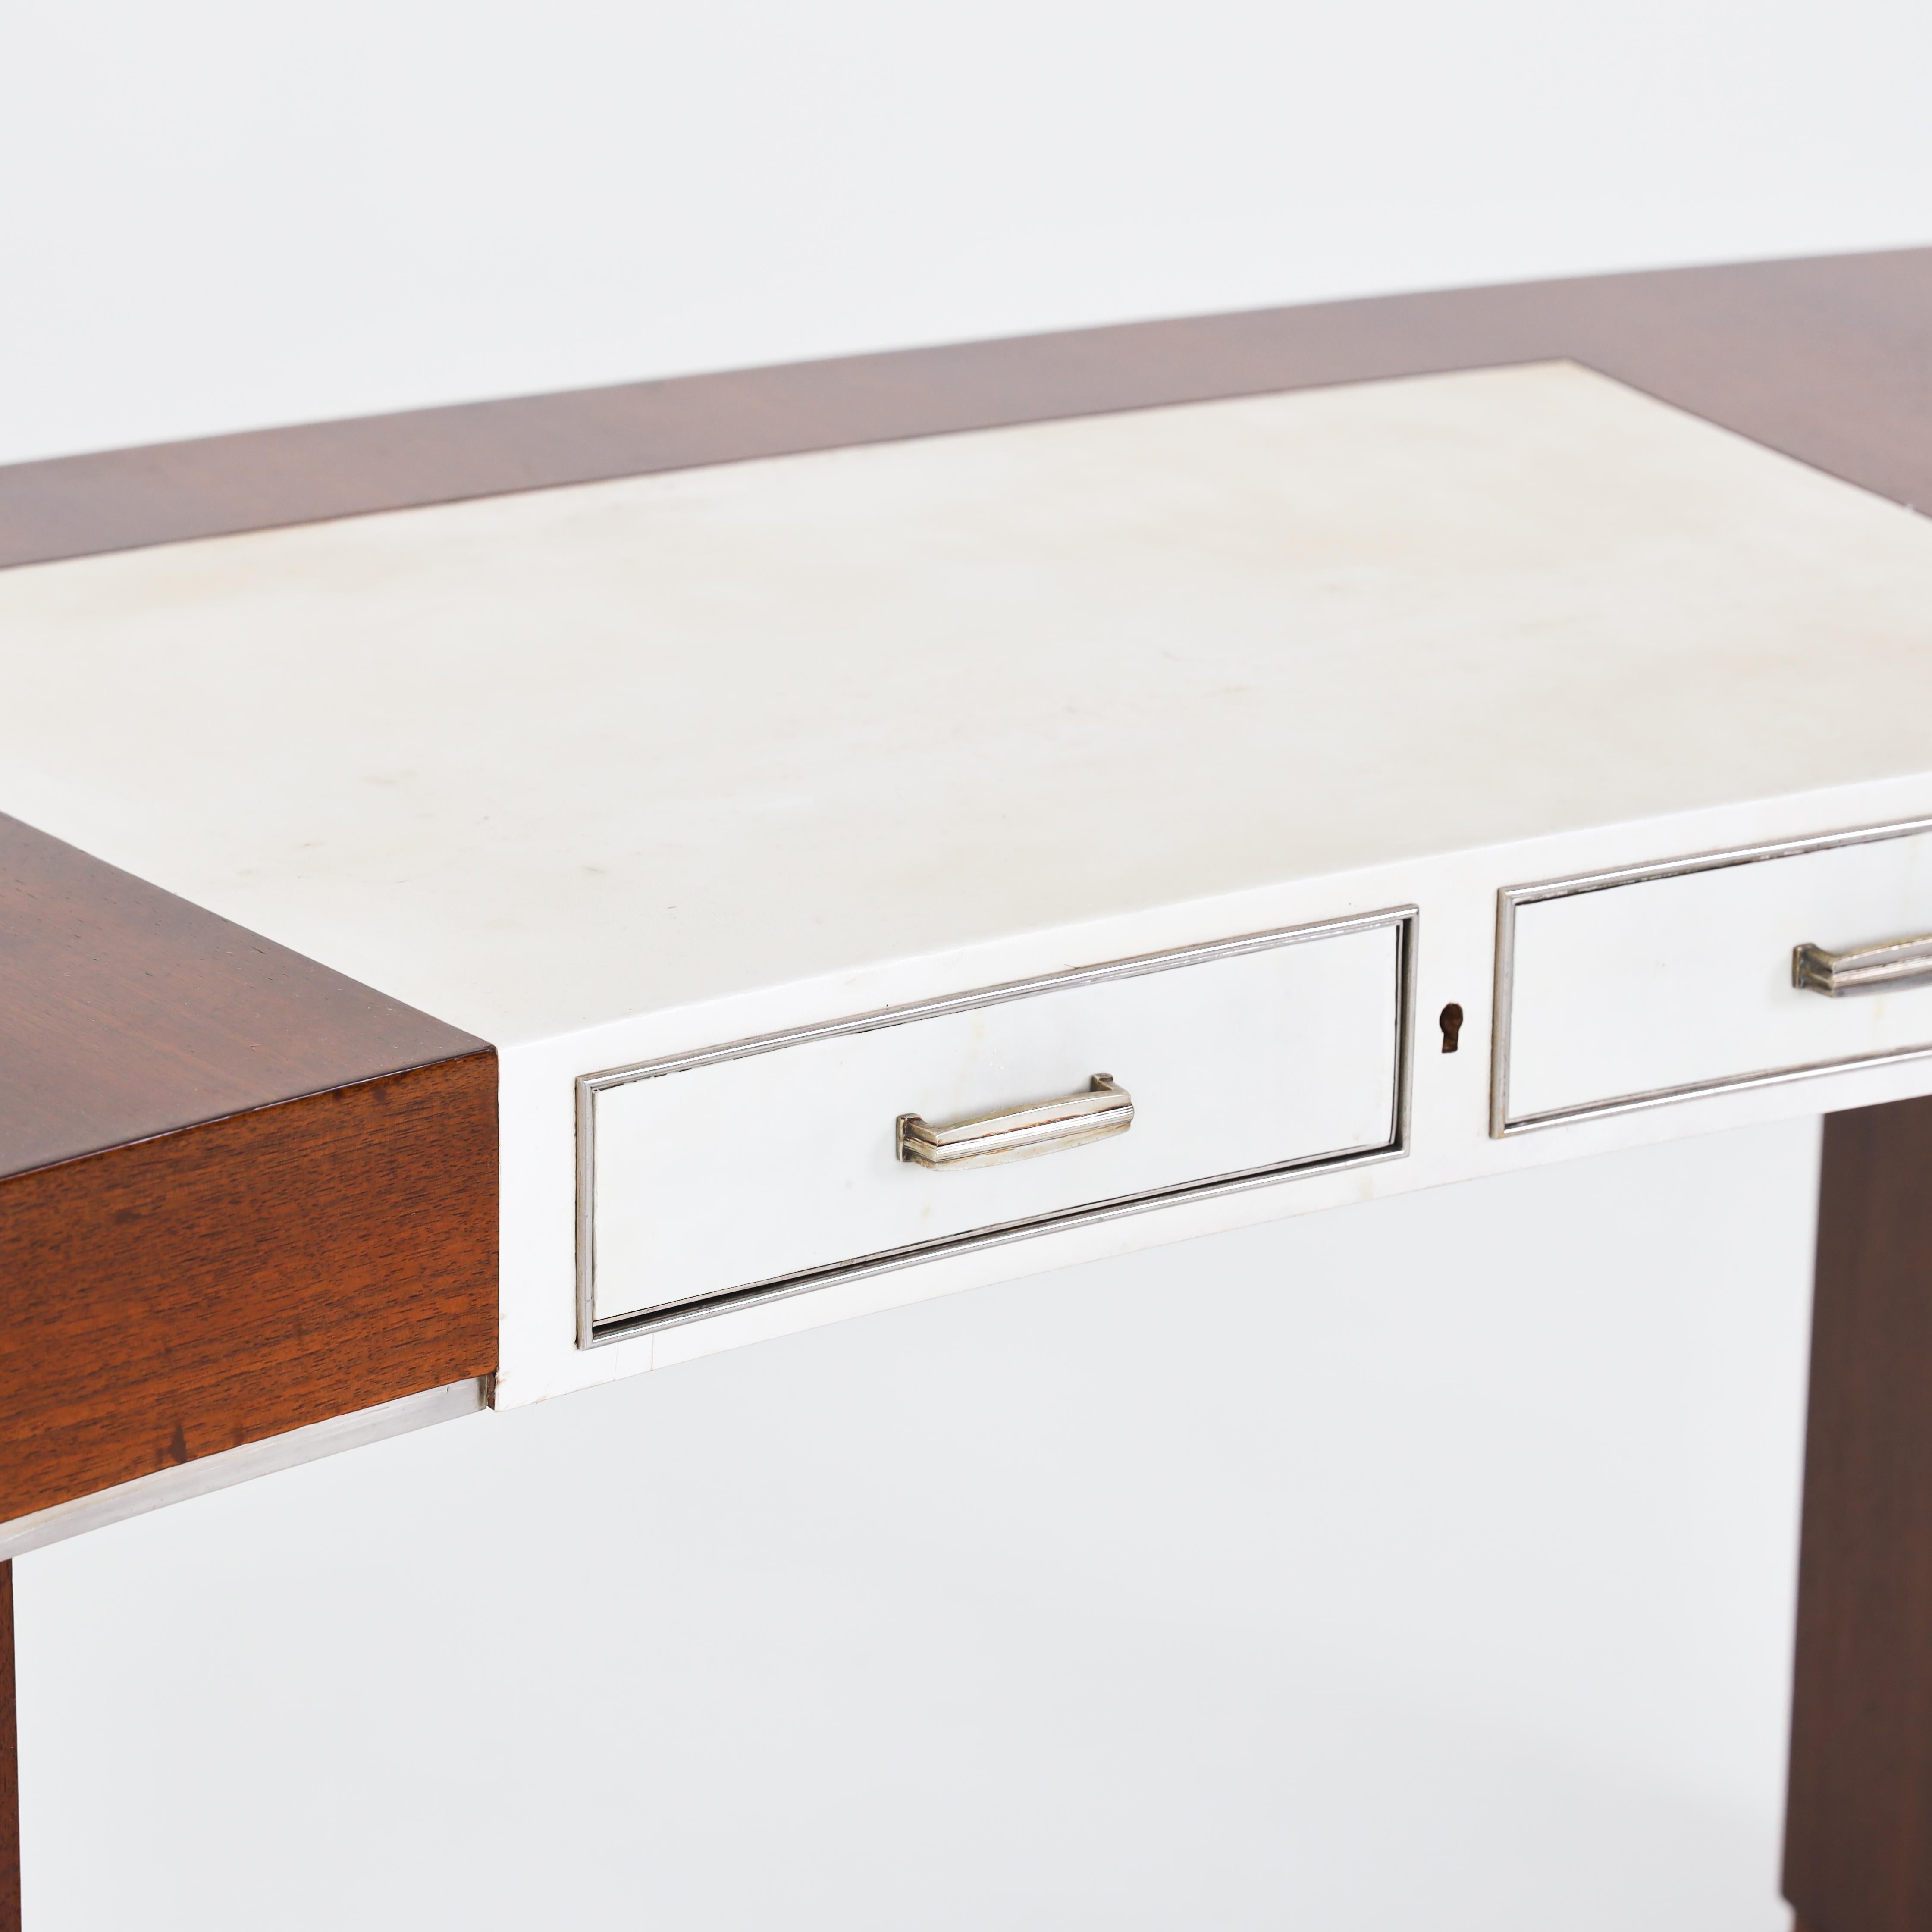 Art Deco desk on rectangular side panels with a flared base and slightly curved trapezoidal tabletop with two drawers. The central section is covered with a creamy white parchment (restored). The drawers, the legs, and the lower edge of the table